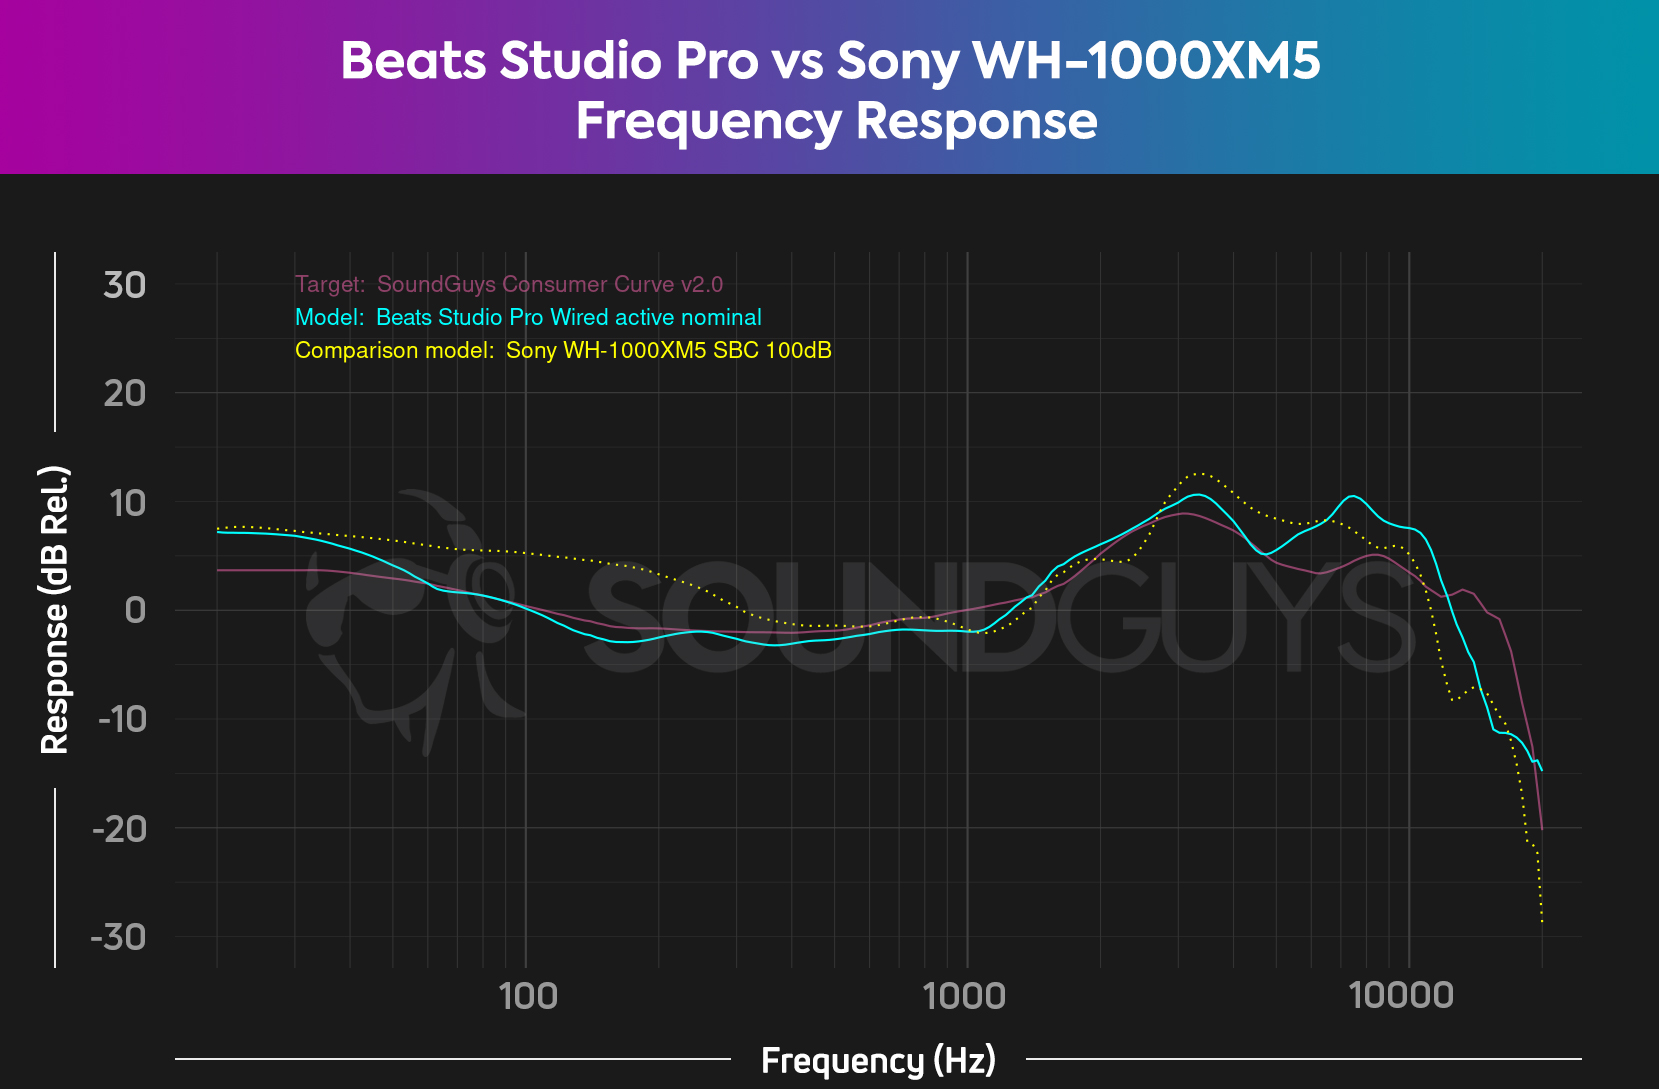 A chart showing the frequency response of the Beats Studio Pro compared to both that of the Sony WH-1000XM5 and the SoundGuys Consumer Curve.